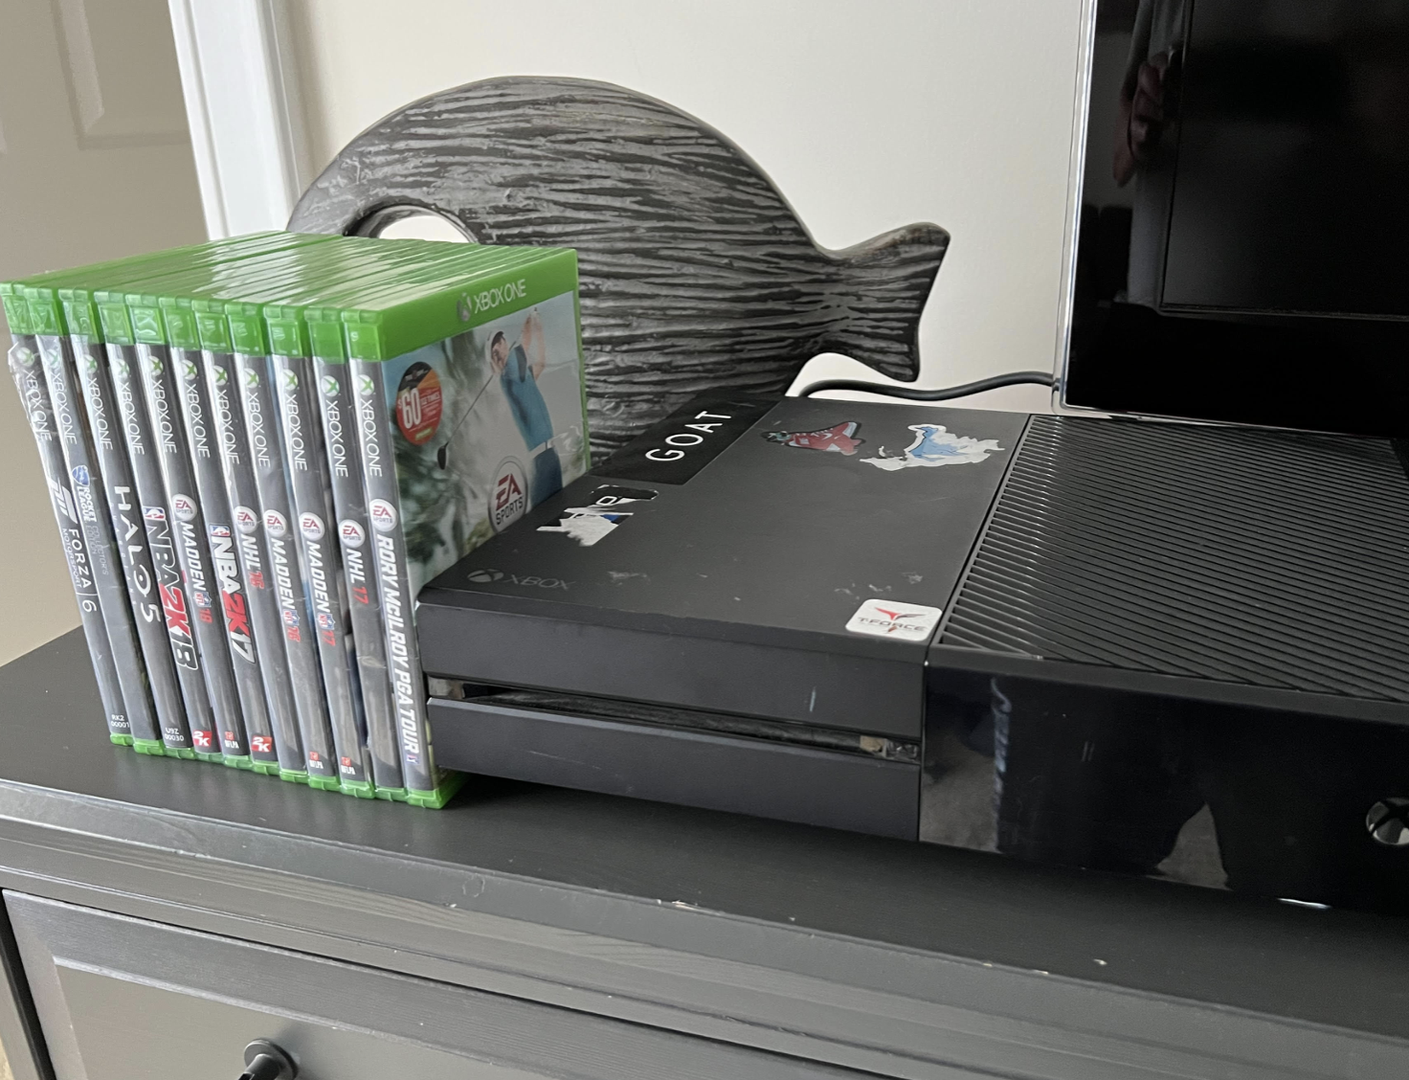 XBox 1 with Games to Play